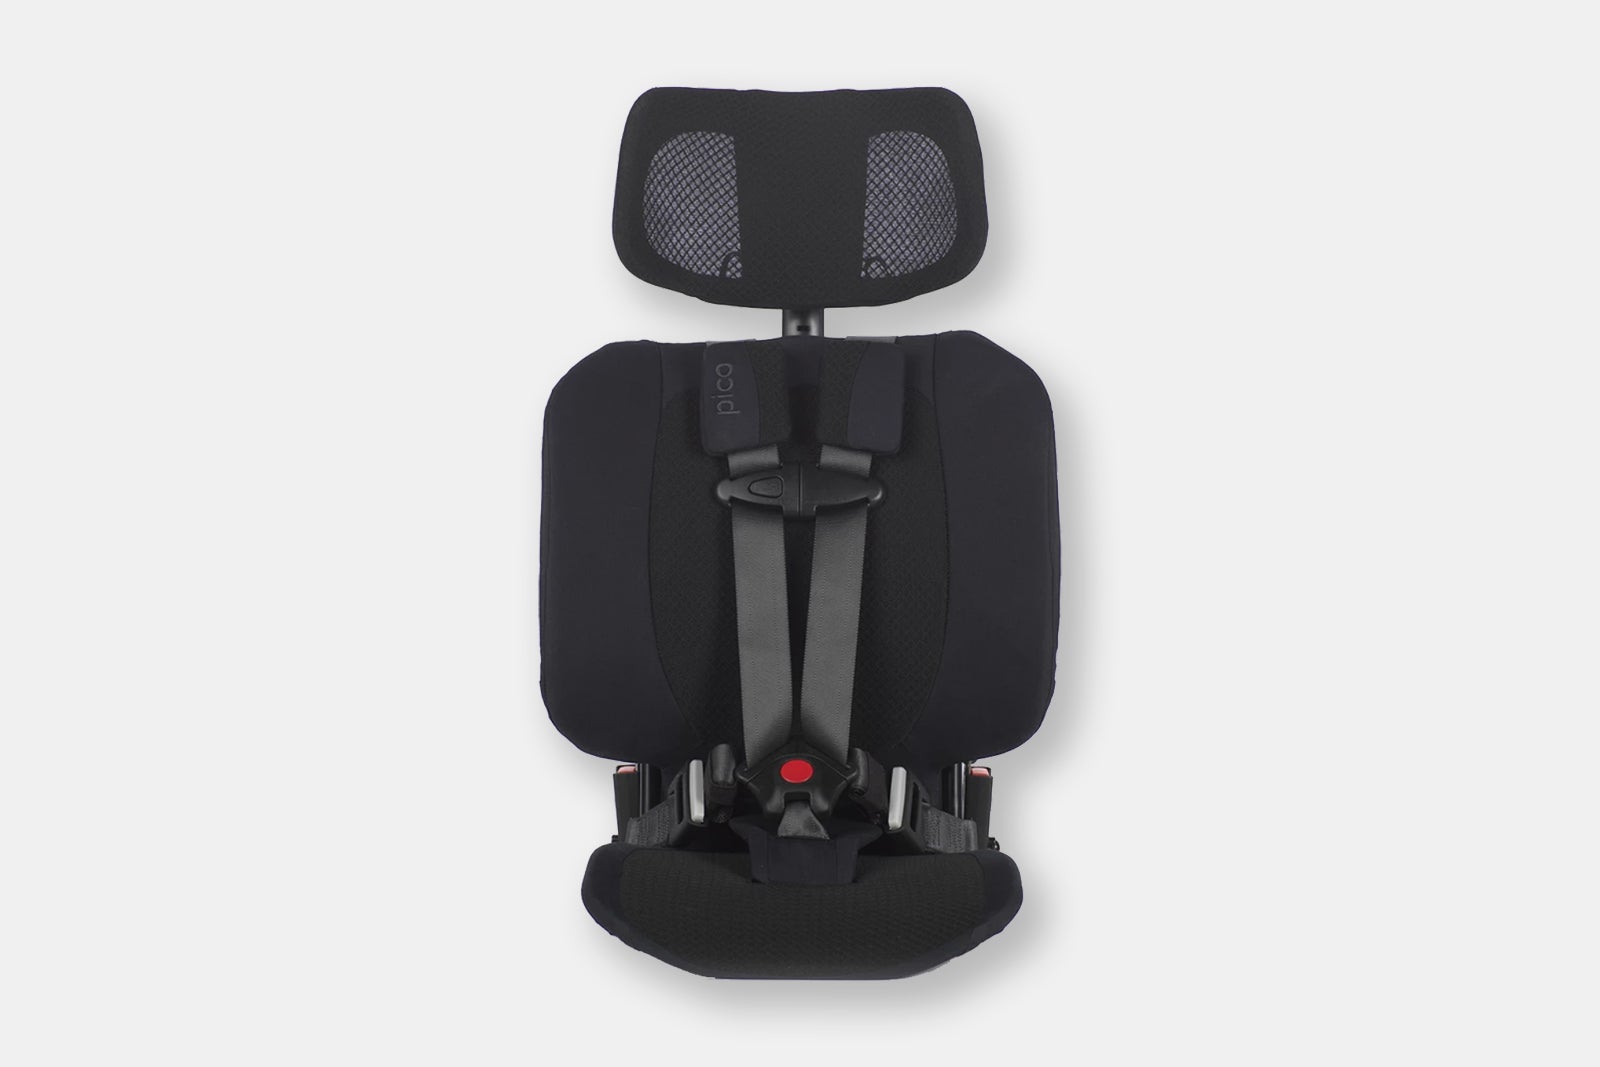 travel car seat for holiday